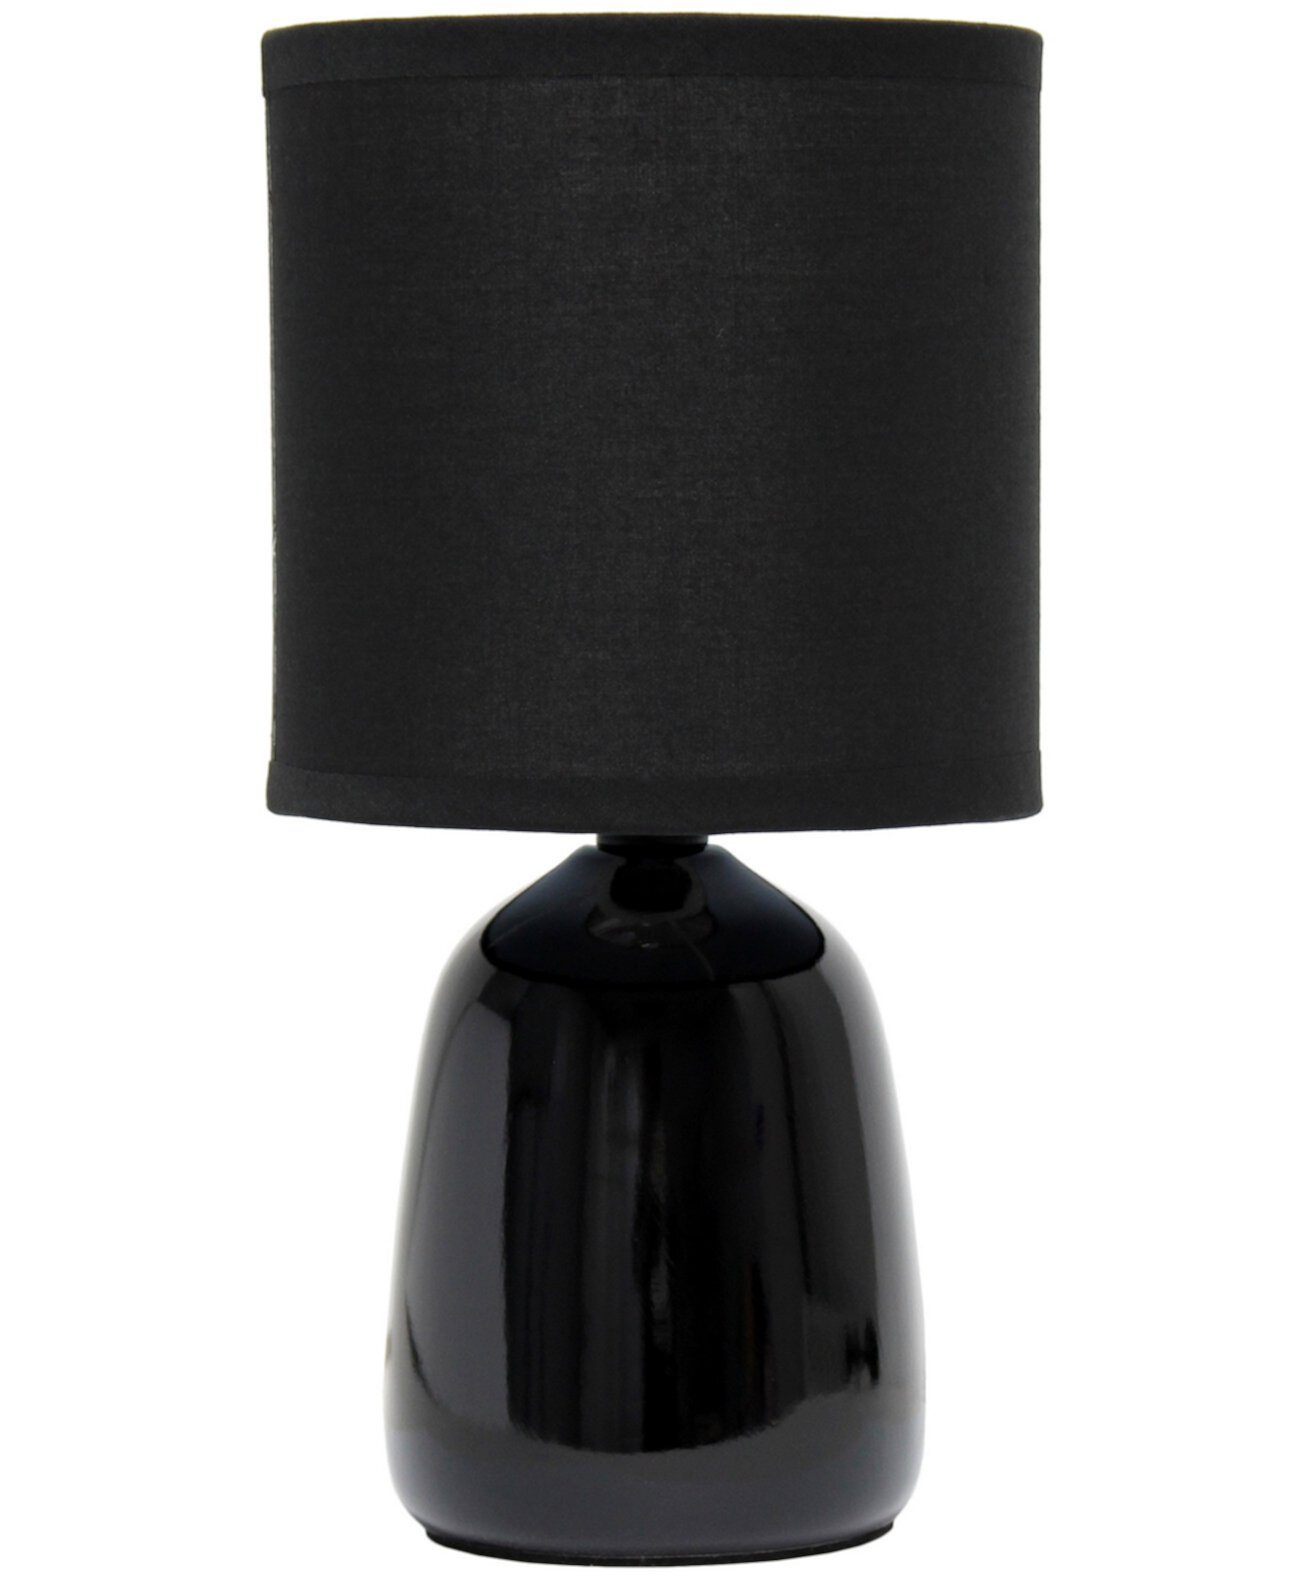 10.04" Tall Traditional Ceramic Thimble Base Bedside Table Desk Lamp with Matching Fabric Shade Simple Designs